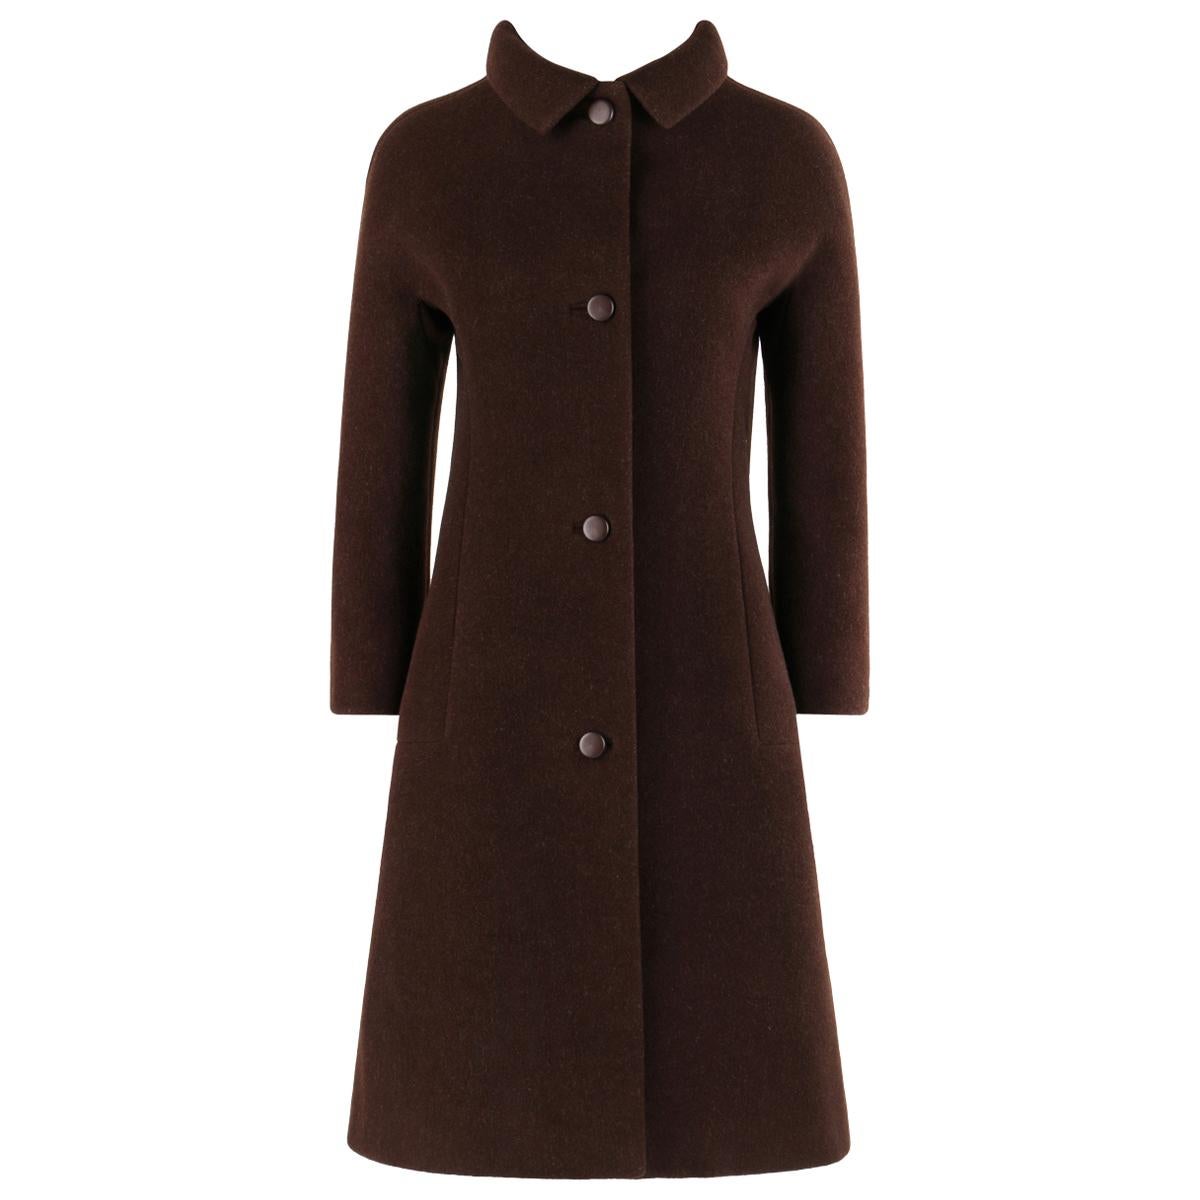 GIVENCHY c. 1960’s Early Haute Couture Dark Brown Wool Princess Coat Jacket